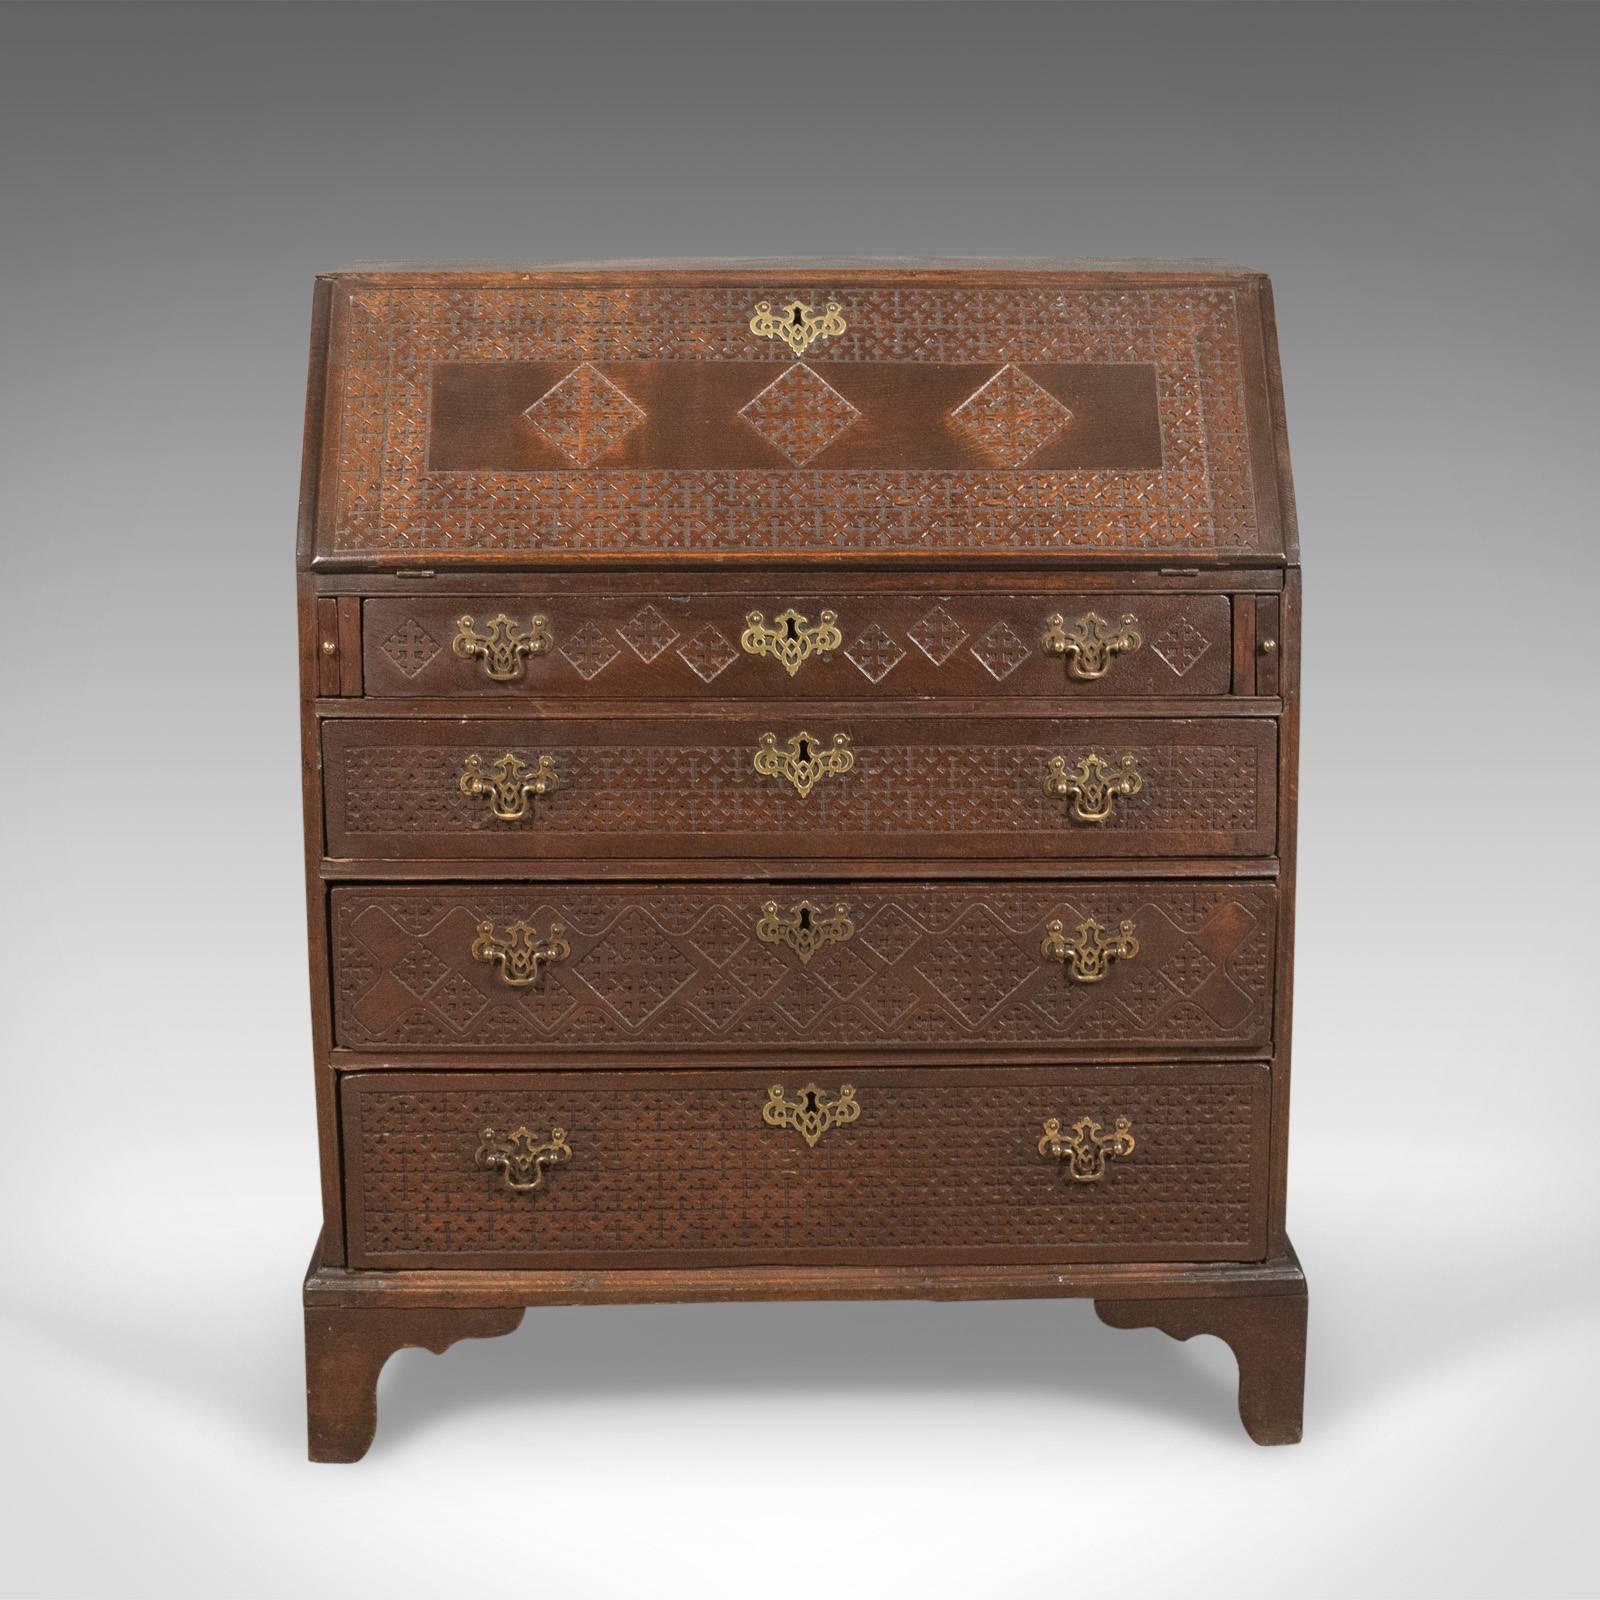 This is a late Georgian antique bureau in English oak. A writing desk dating to circa 1800.

Warm country feel and a desirable aged patina in the wax polished finish
Profusely decorated with blind fret geometric decoration
Standing upon Georgian